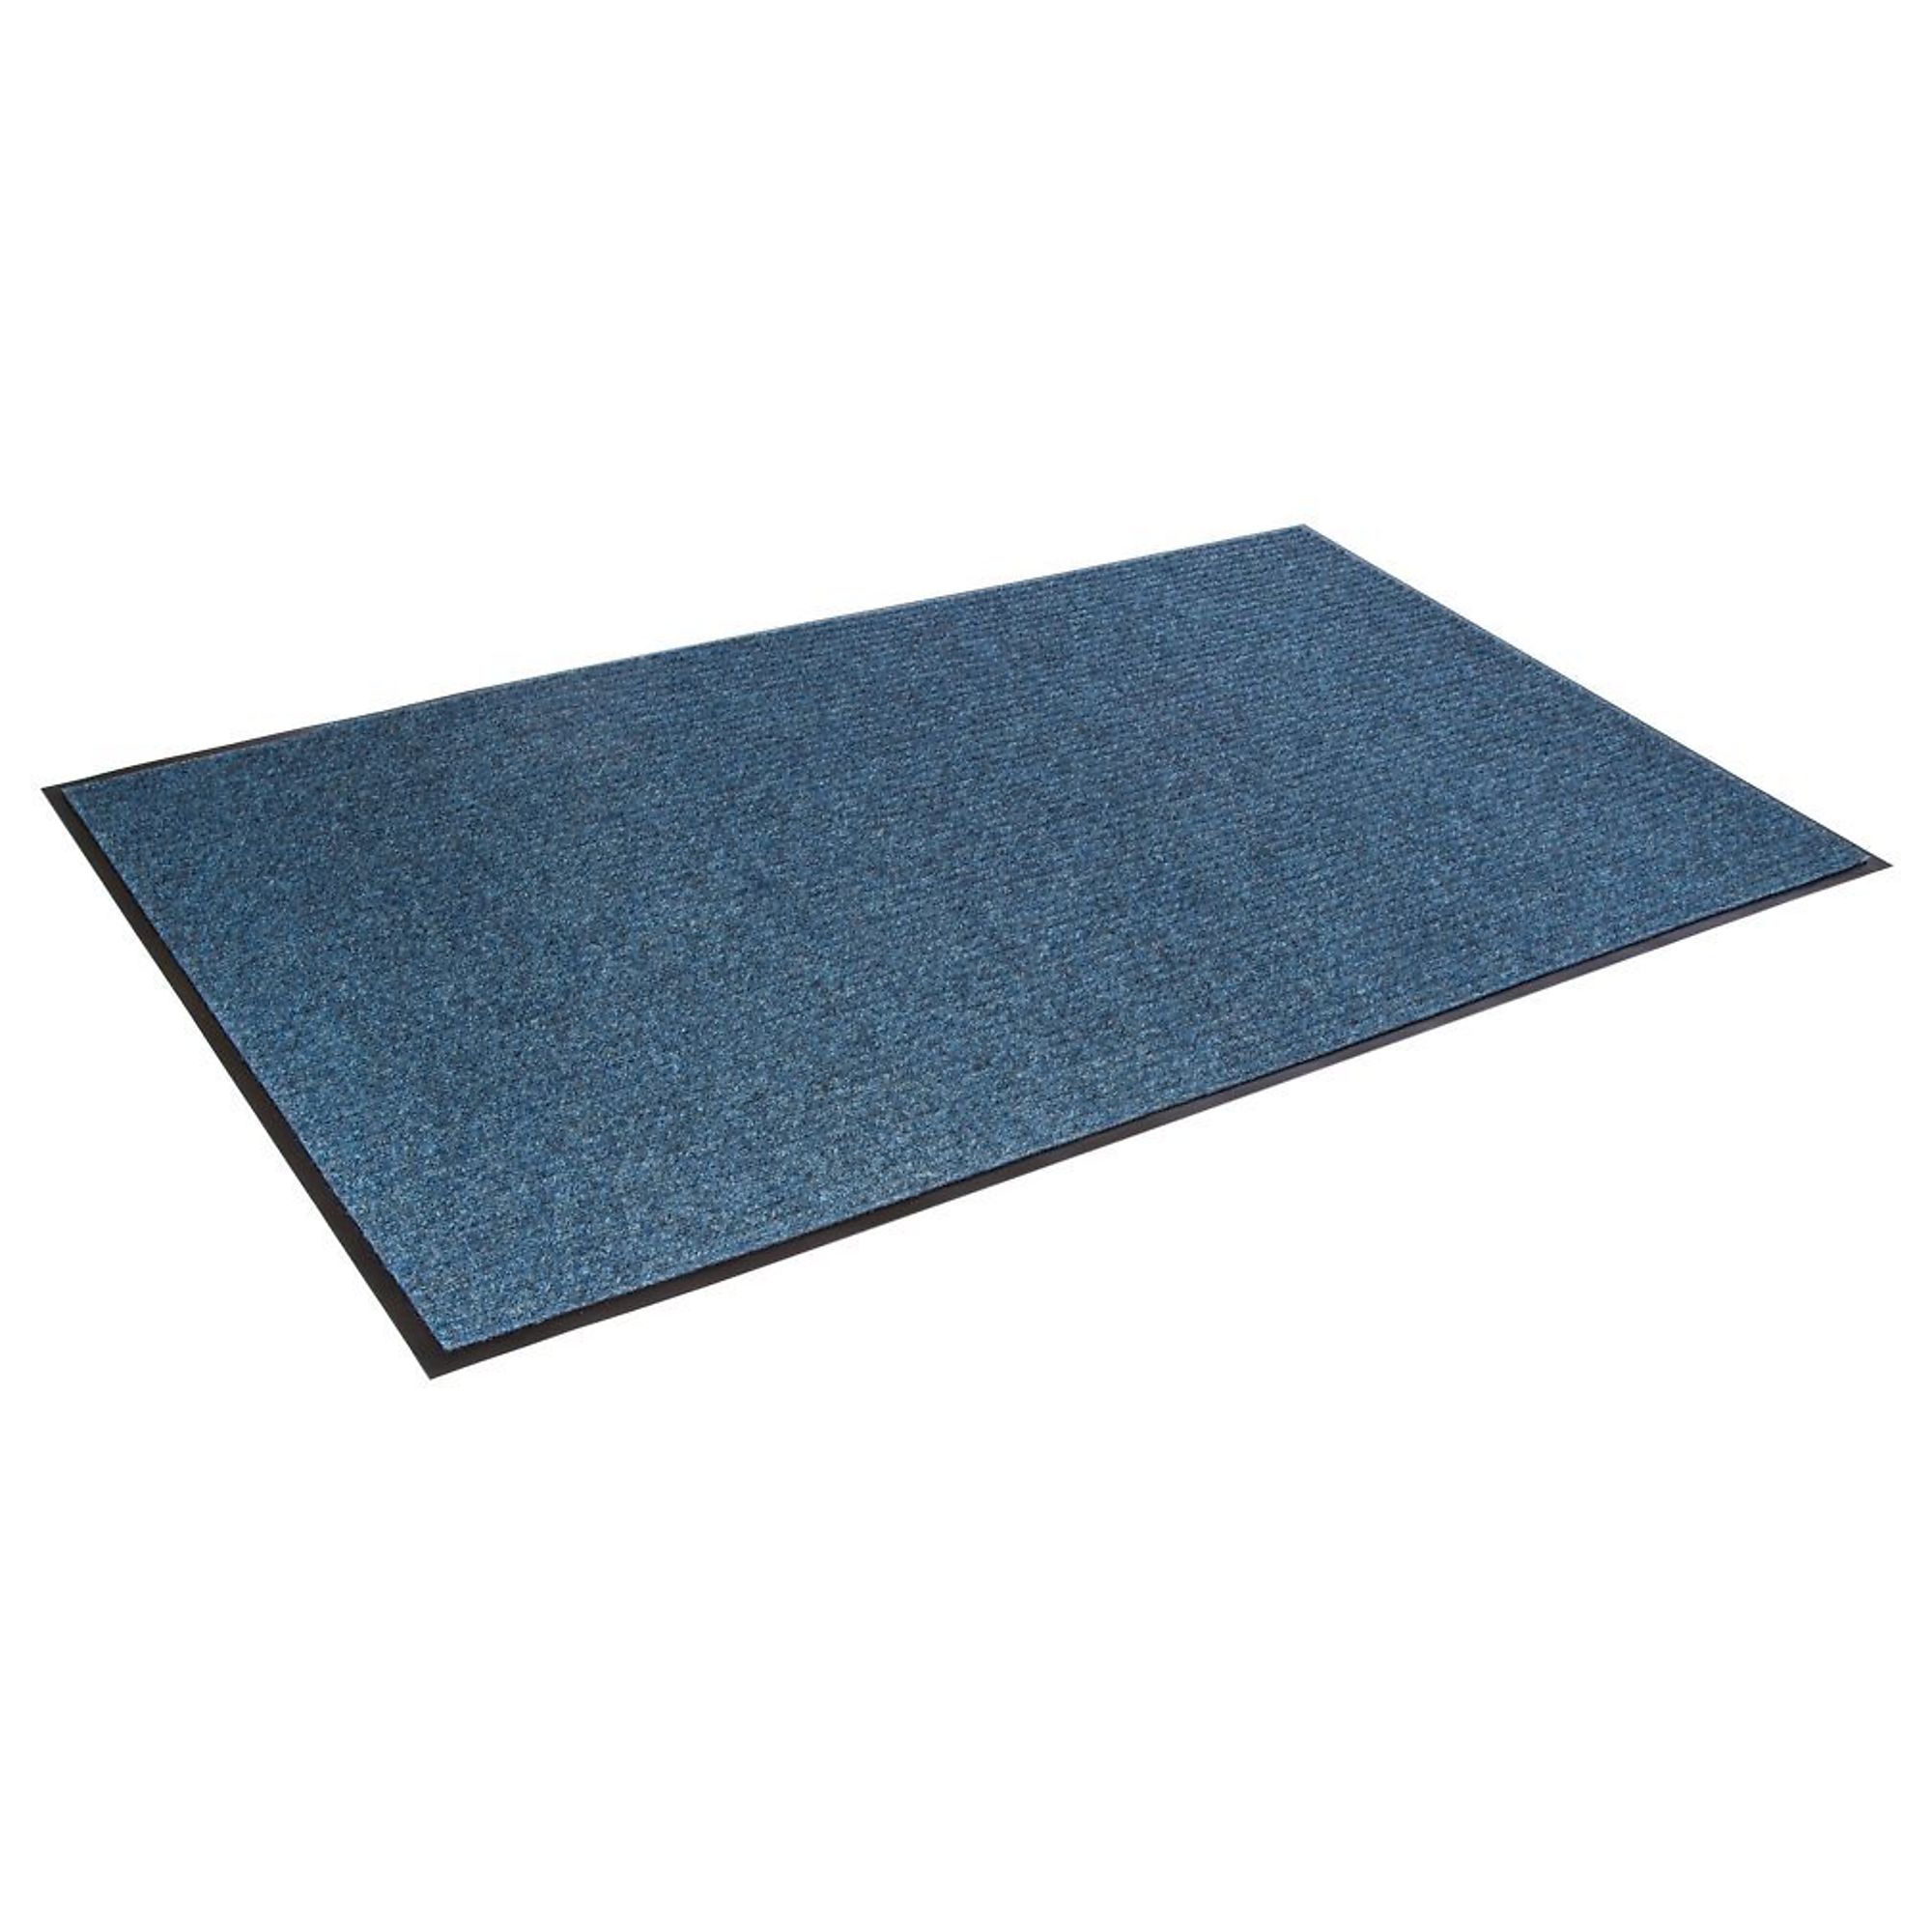 Crown Matting Technologies, Needle-Rib 2ft.x3ft. Blue, Width 24 in, Length 36 in, Thickness 5/16 in, Model NR 0023BL